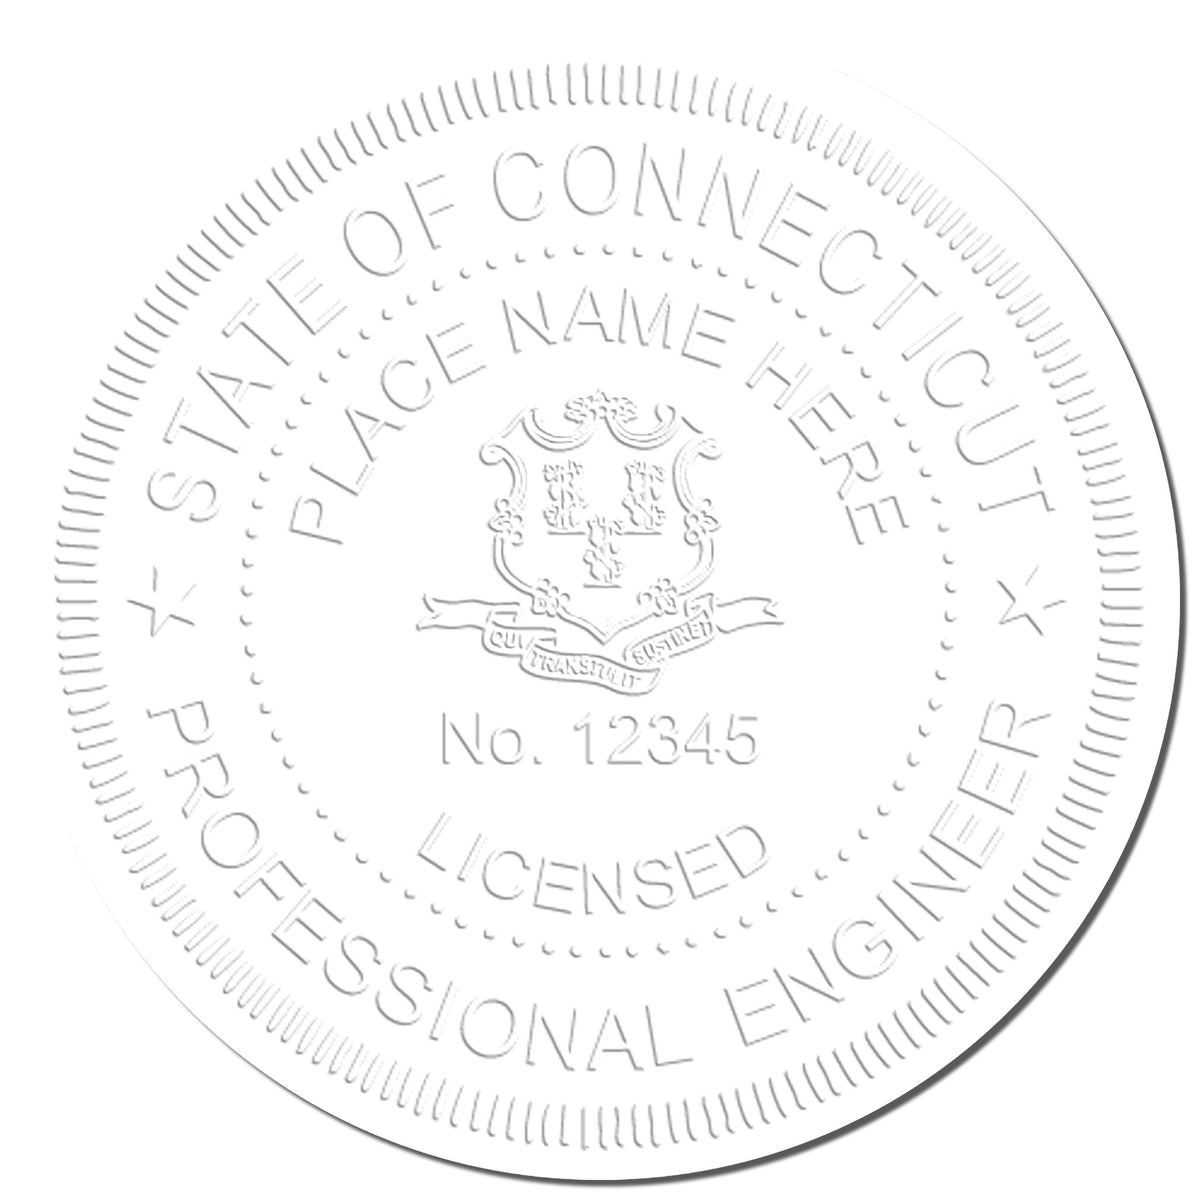 This paper is stamped with a sample imprint of the Heavy Duty Cast Iron Connecticut Engineer Seal Embosser, signifying its quality and reliability.